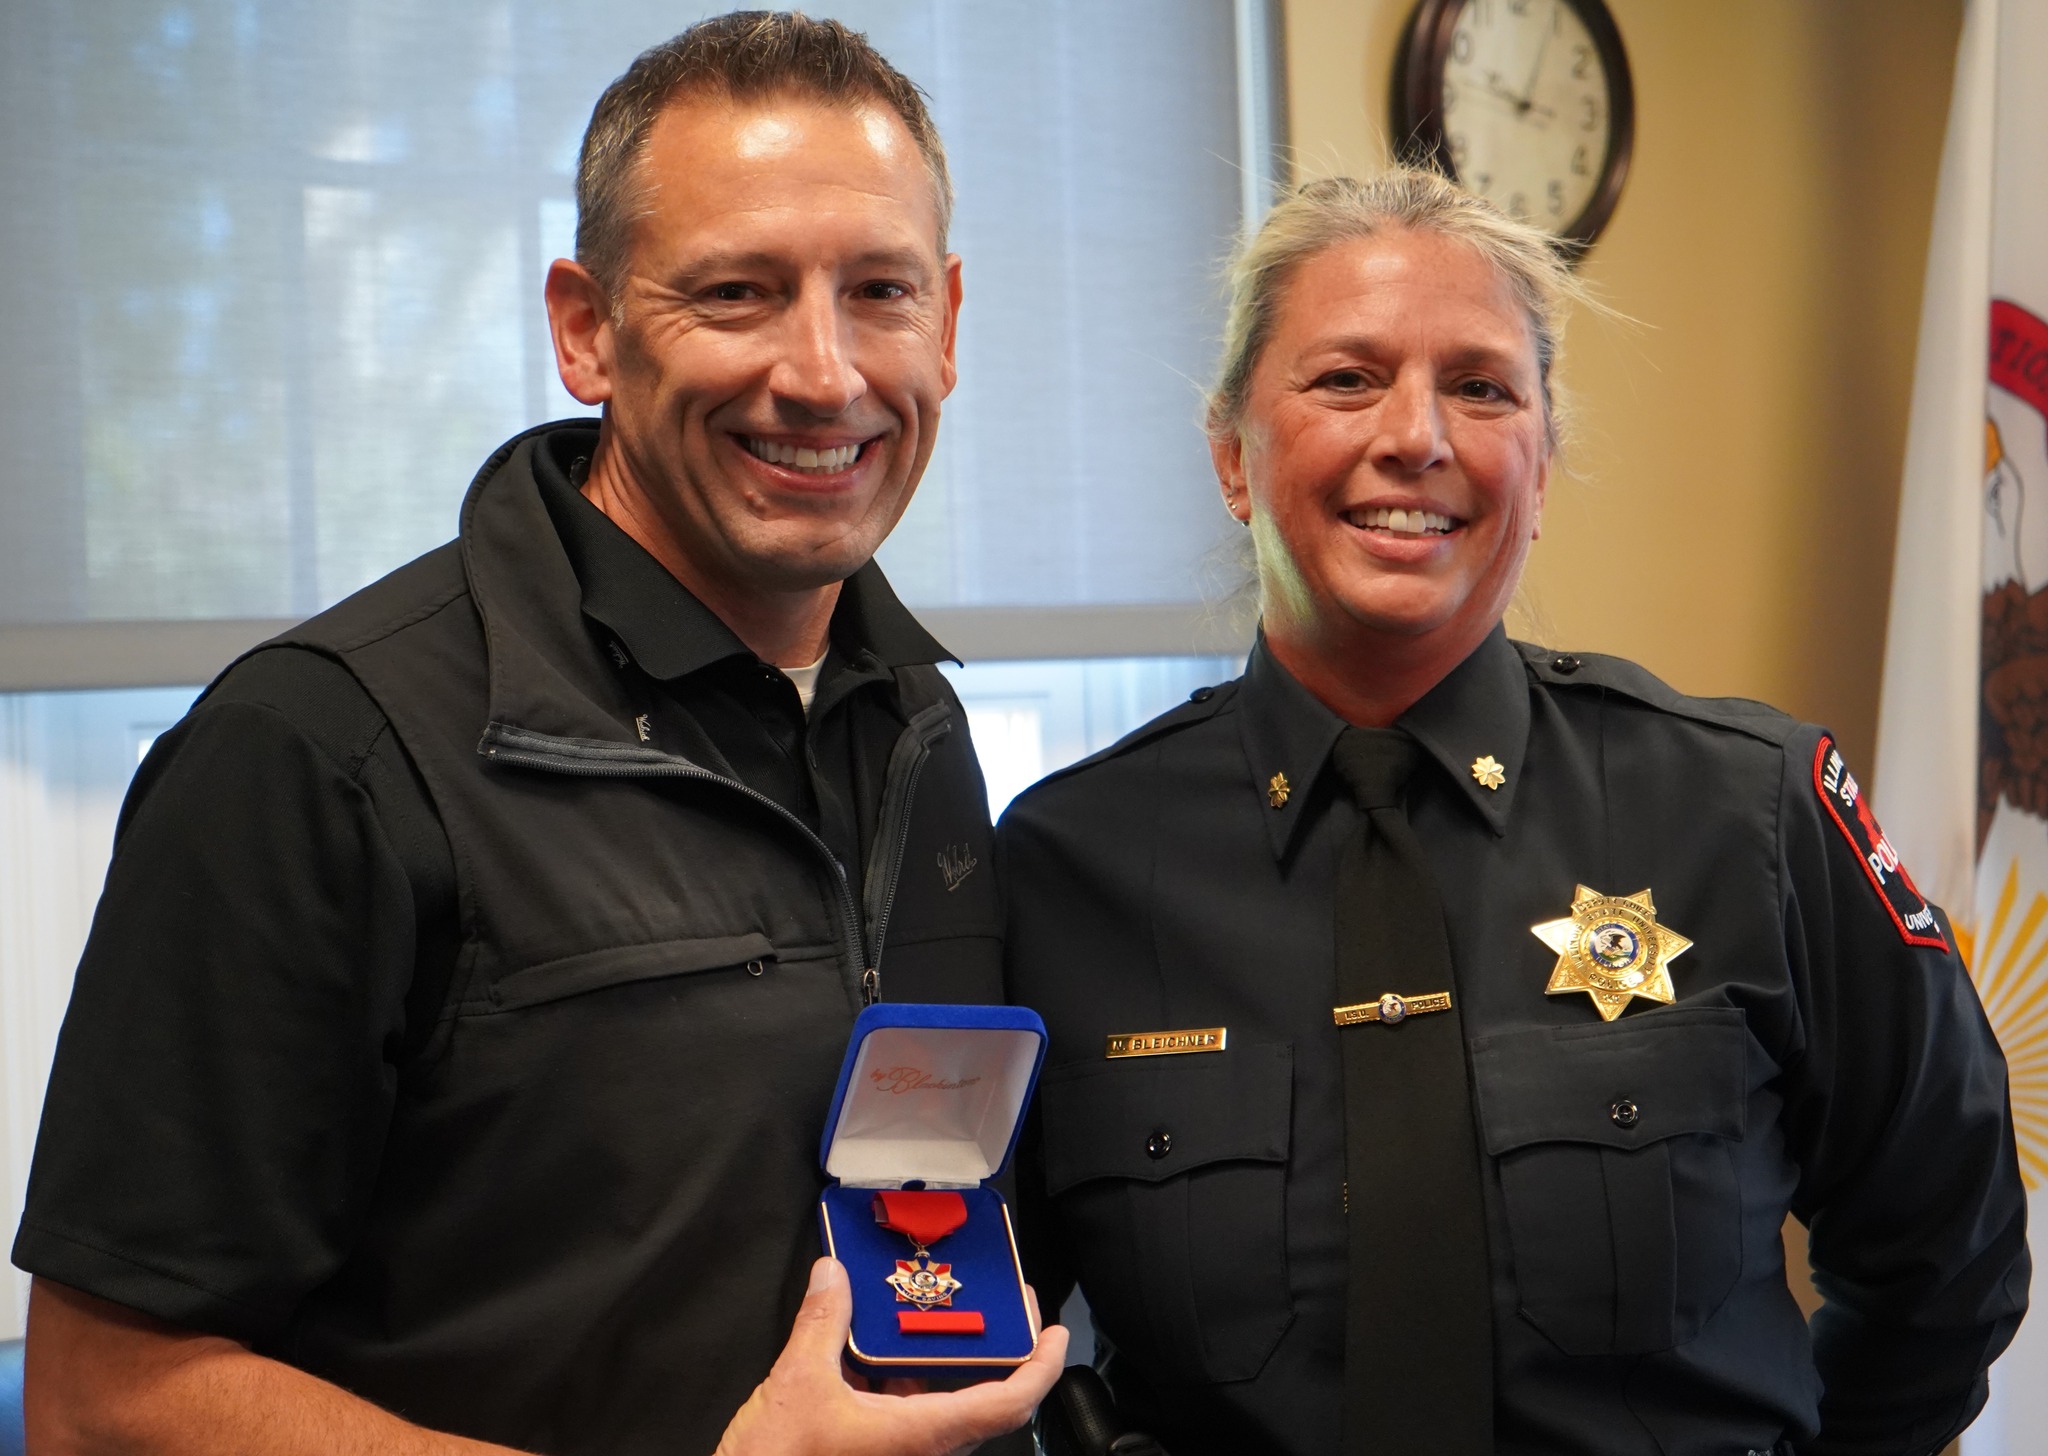 ISU Police Chief honored with award after saving a man’s life